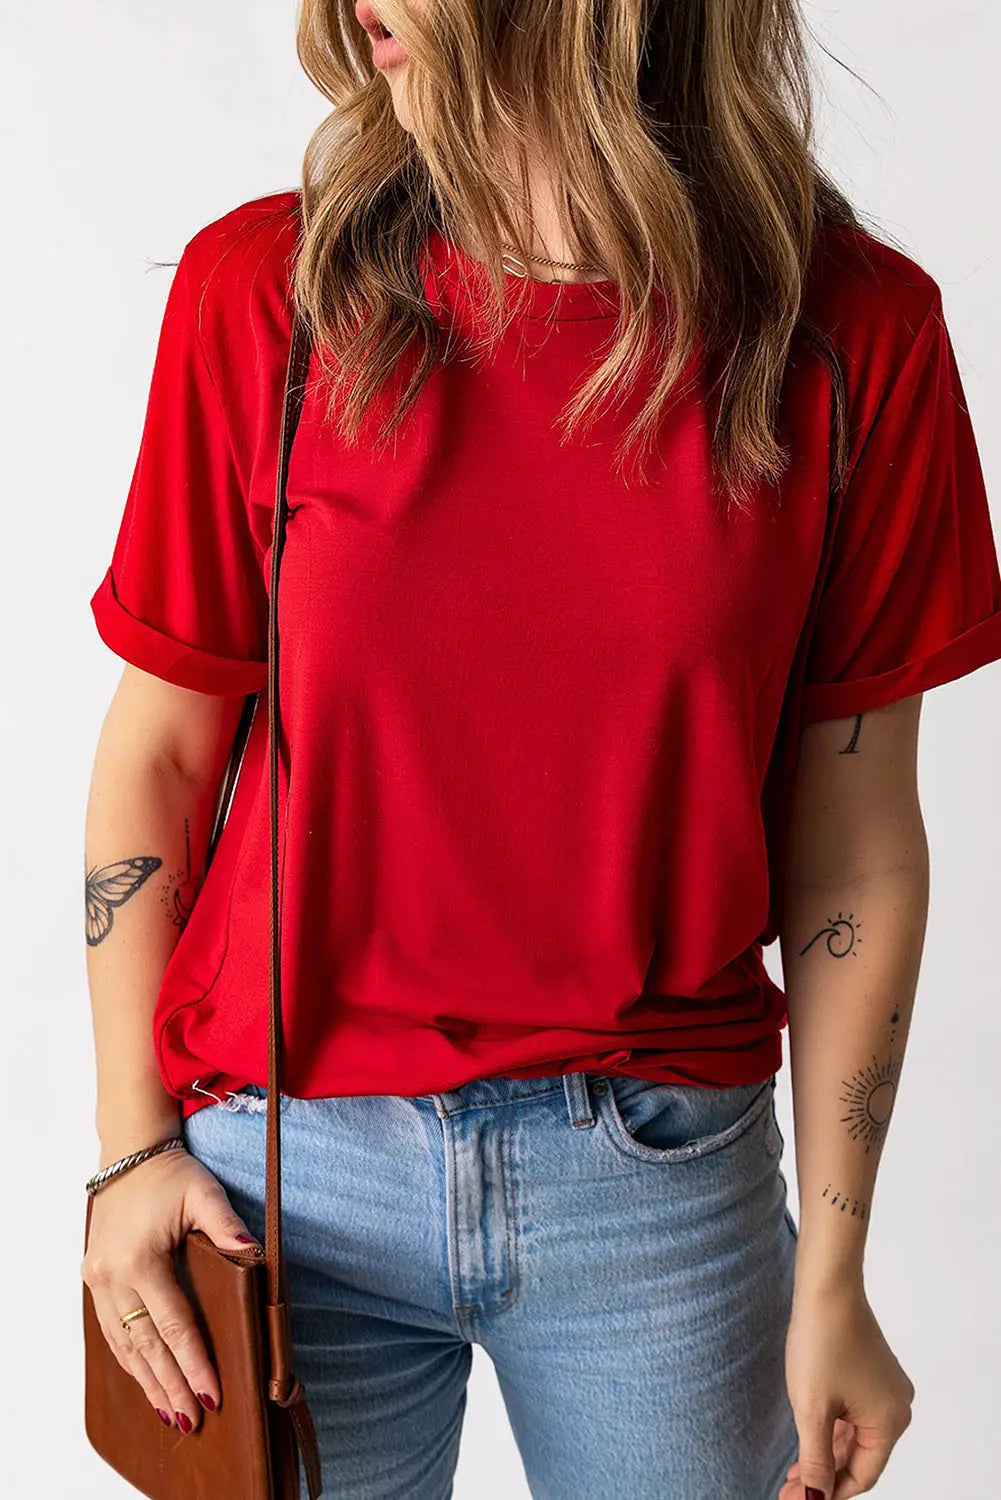 Red solid color crew neck tee - red-2 / s / 95% polyester + 5% elastane - t-shirts